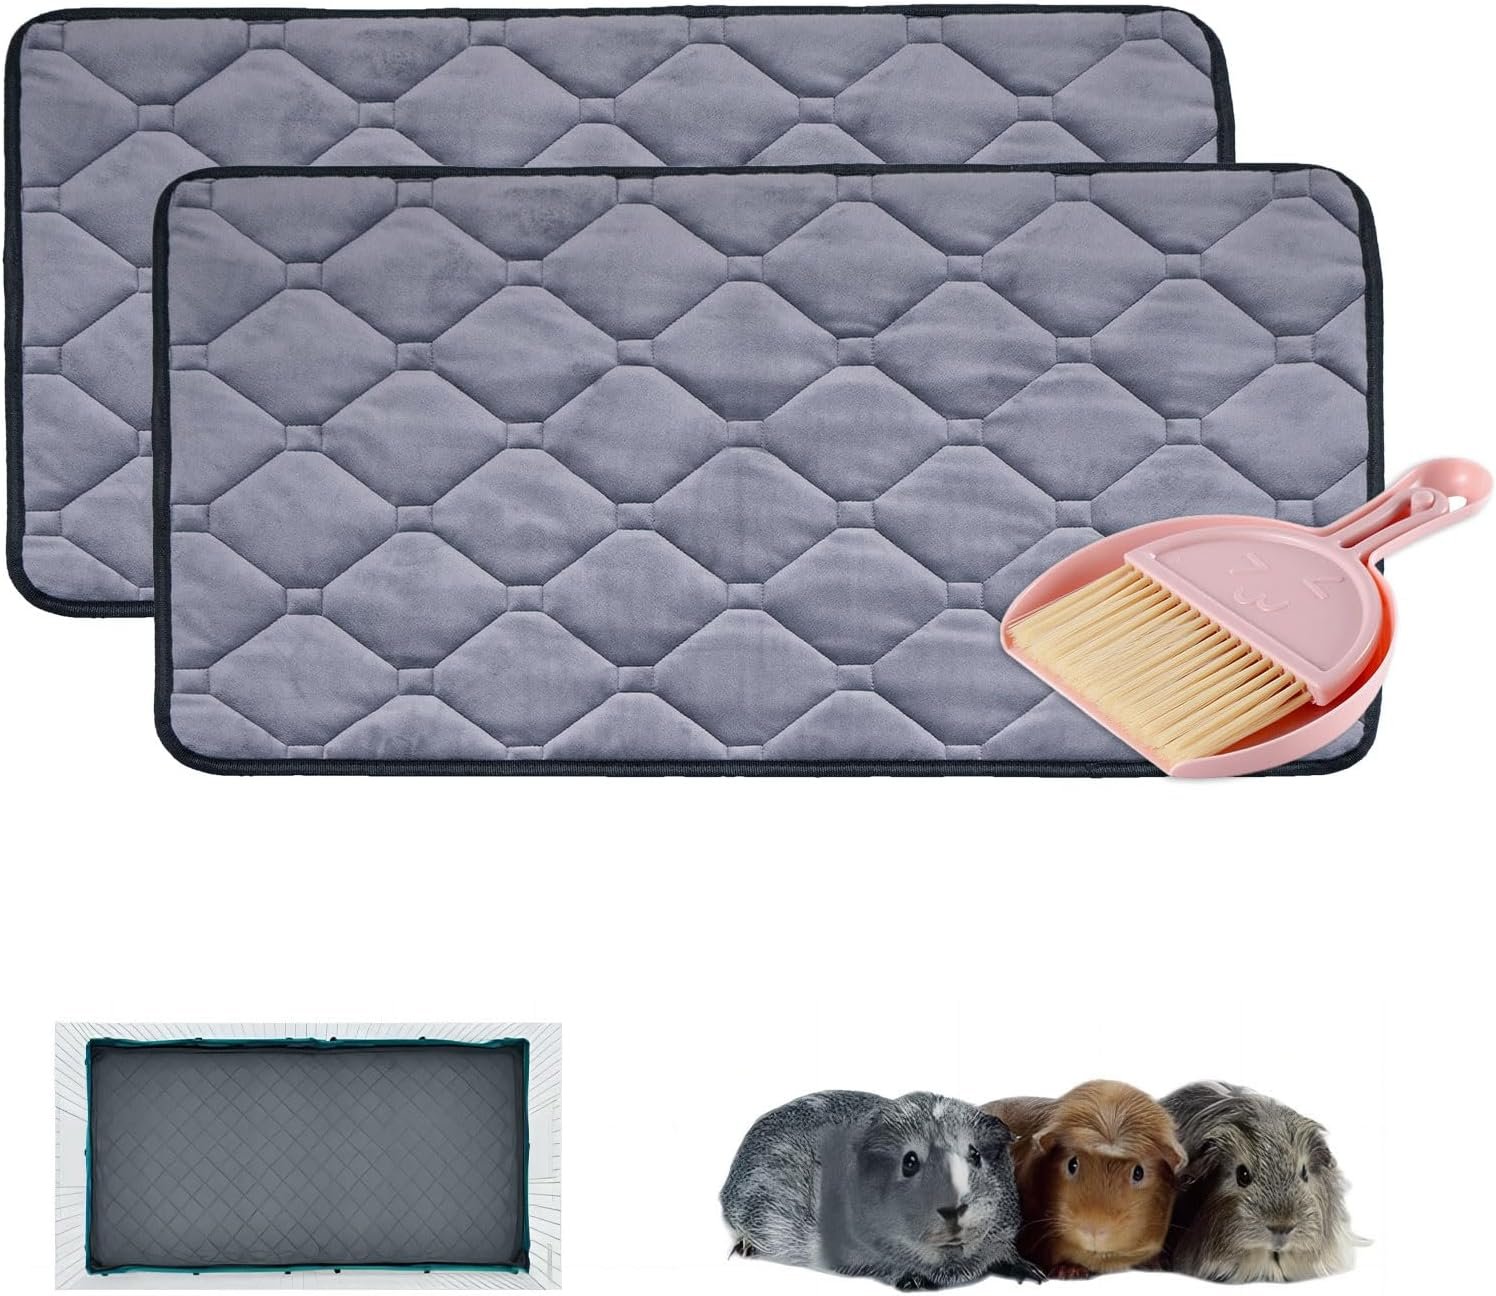 2 Pack Midwest Fleece Guinea Pig Cage Liners , Washable 47x24 Inch Thick Soft Guinea Pig Bedding, Small Pet Accessories for Cage